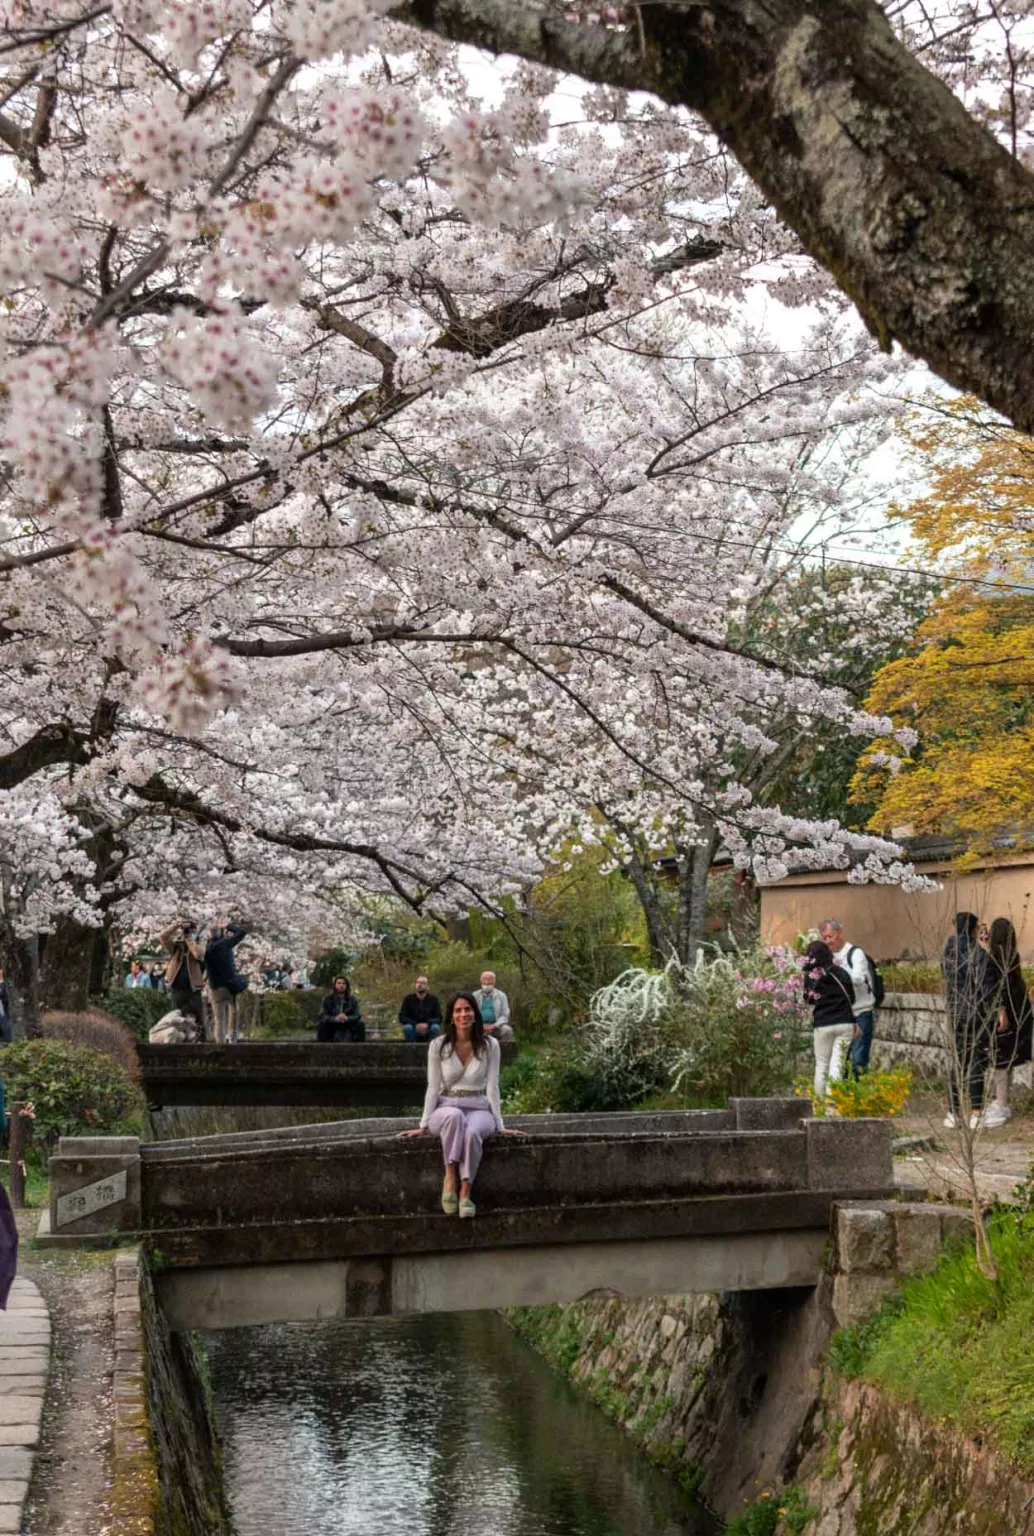 Best cherry Blossom spots in Kyoto